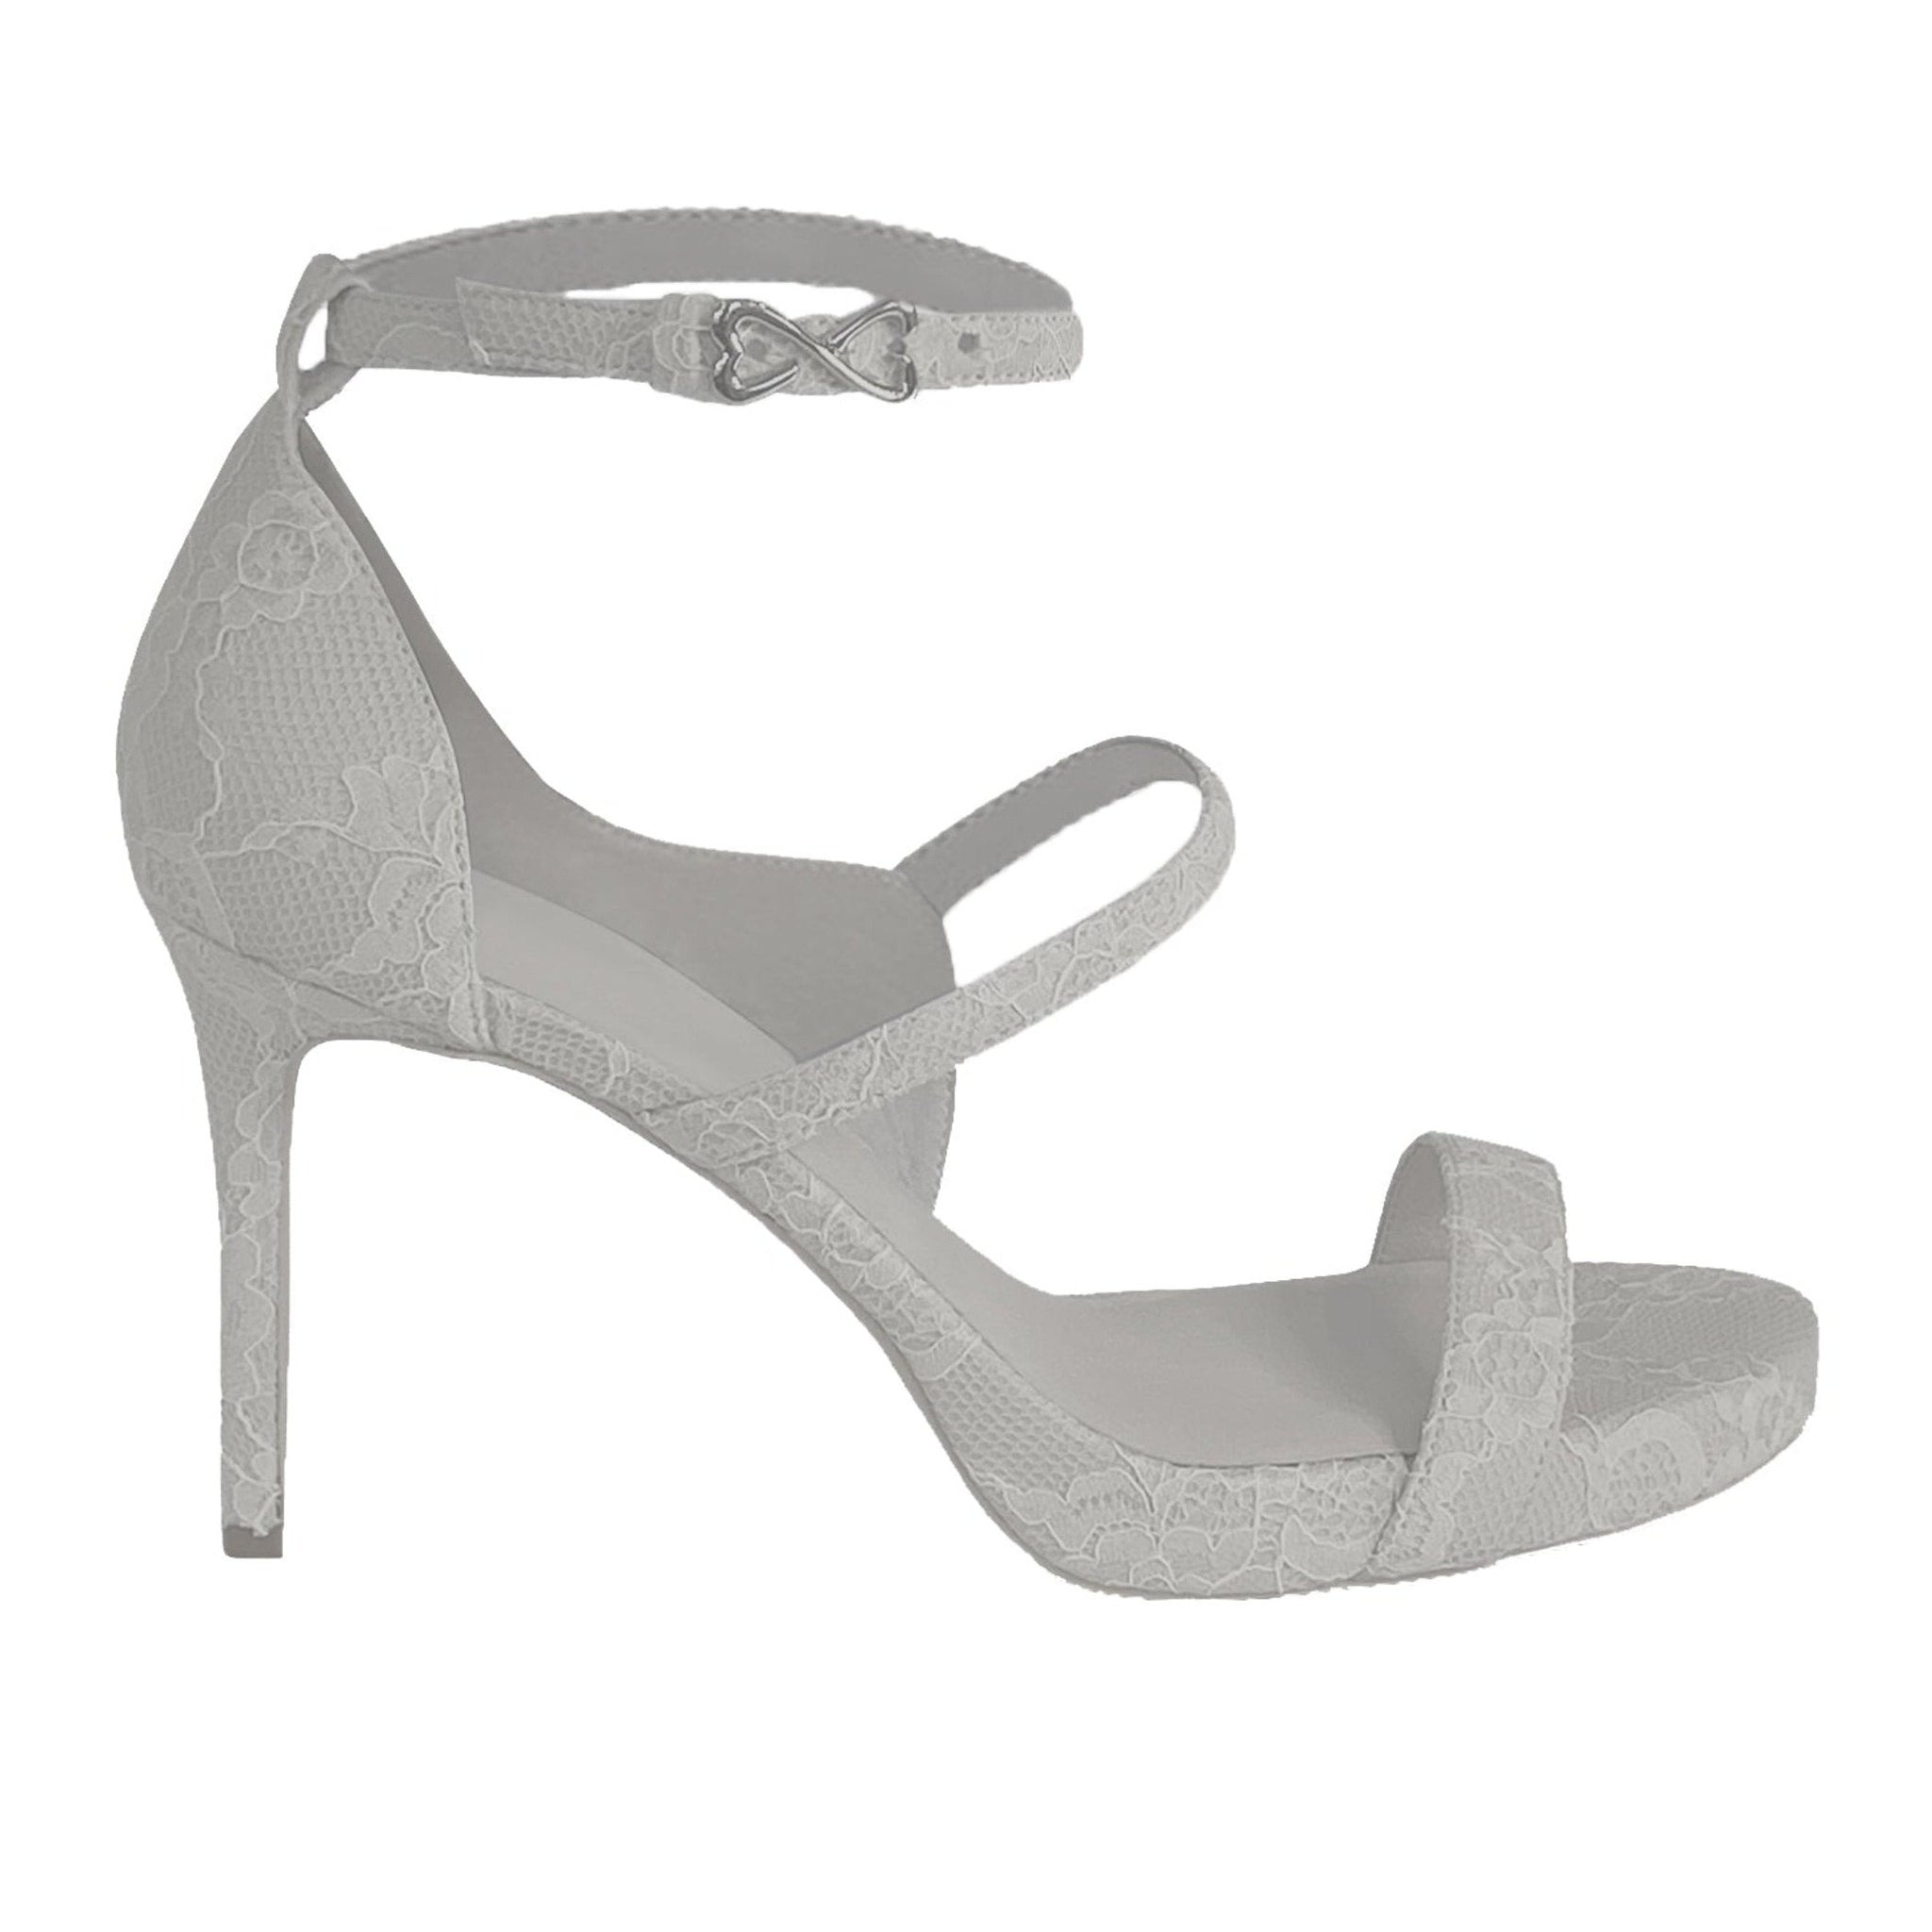 white lace overly bridal sandal heel platformed ankle strap extended sizing